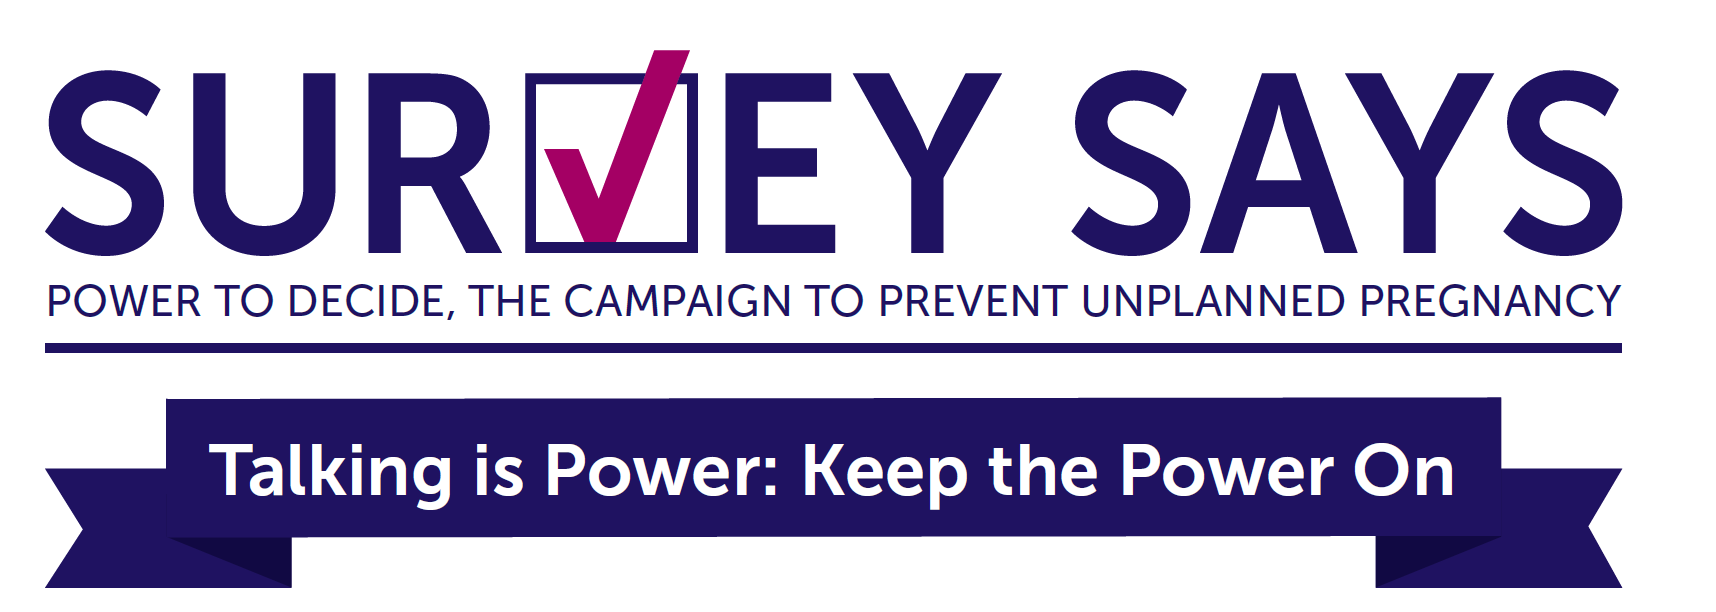 The header of the fact sheet, which reads, "Survey Says. Talking is Power: Keep the Power On."